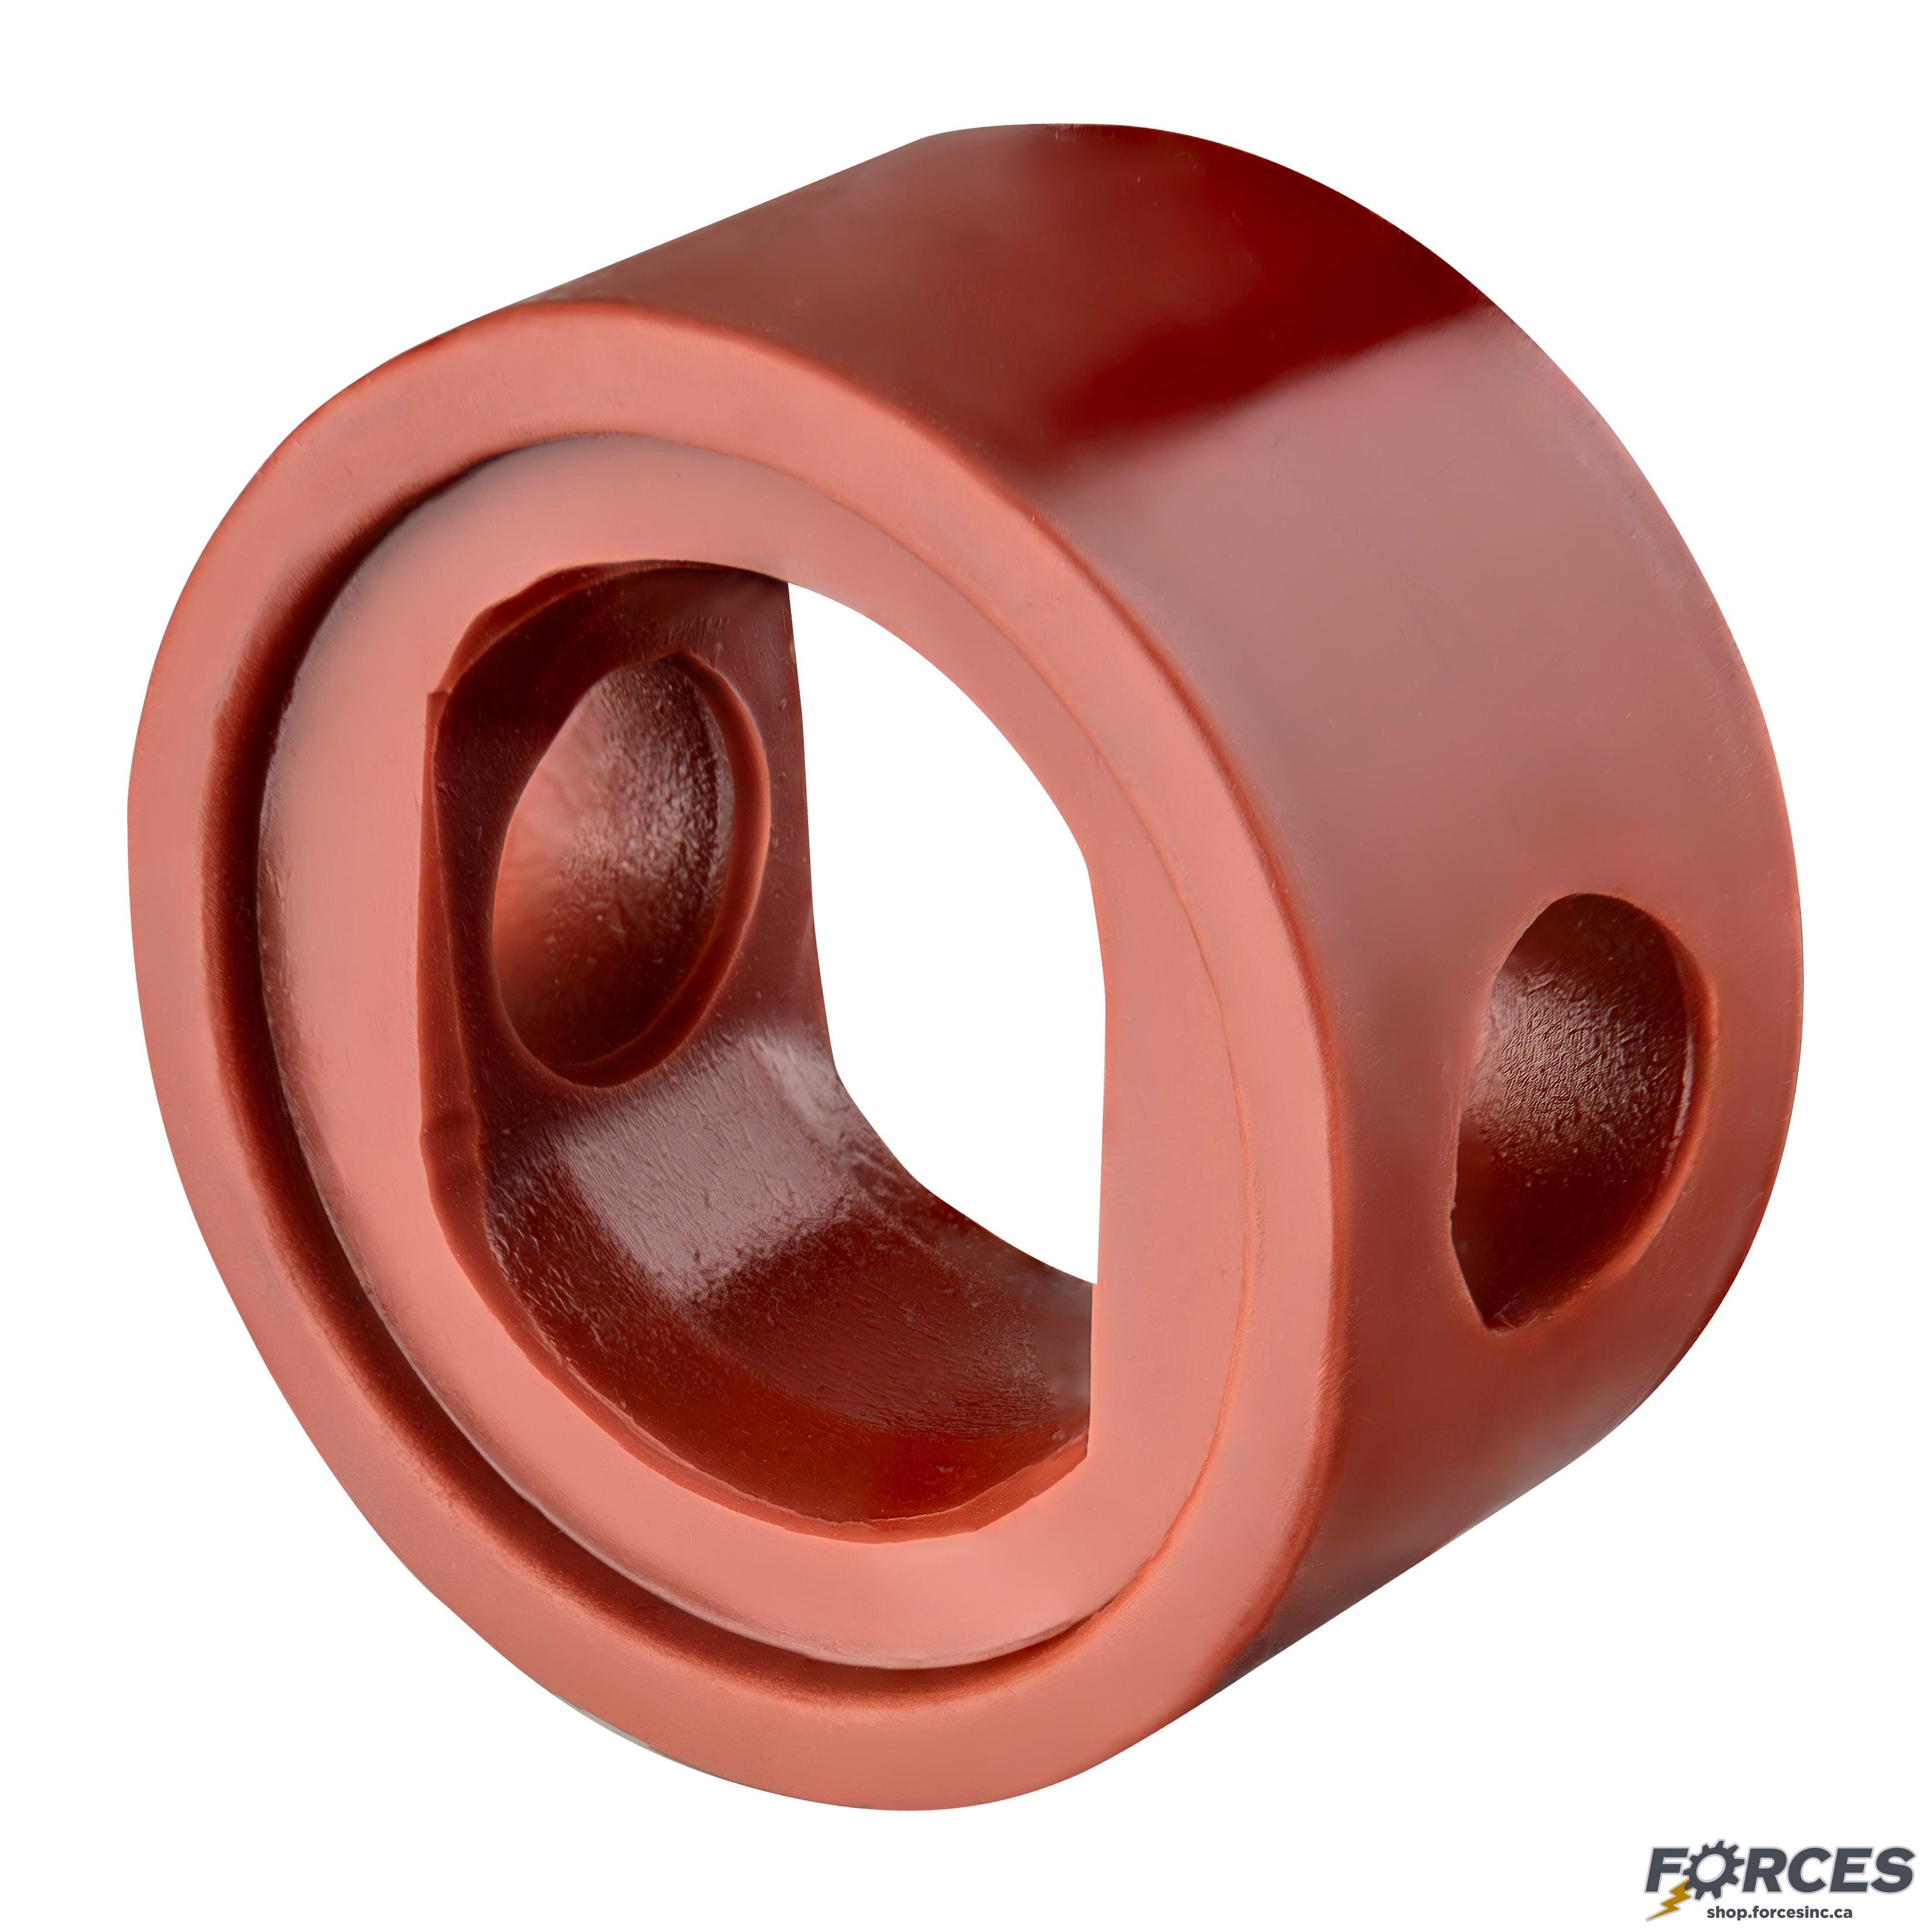 2-1/2" Sanitary Butterfly Valve Seat - Red Silicone - Forces Inc